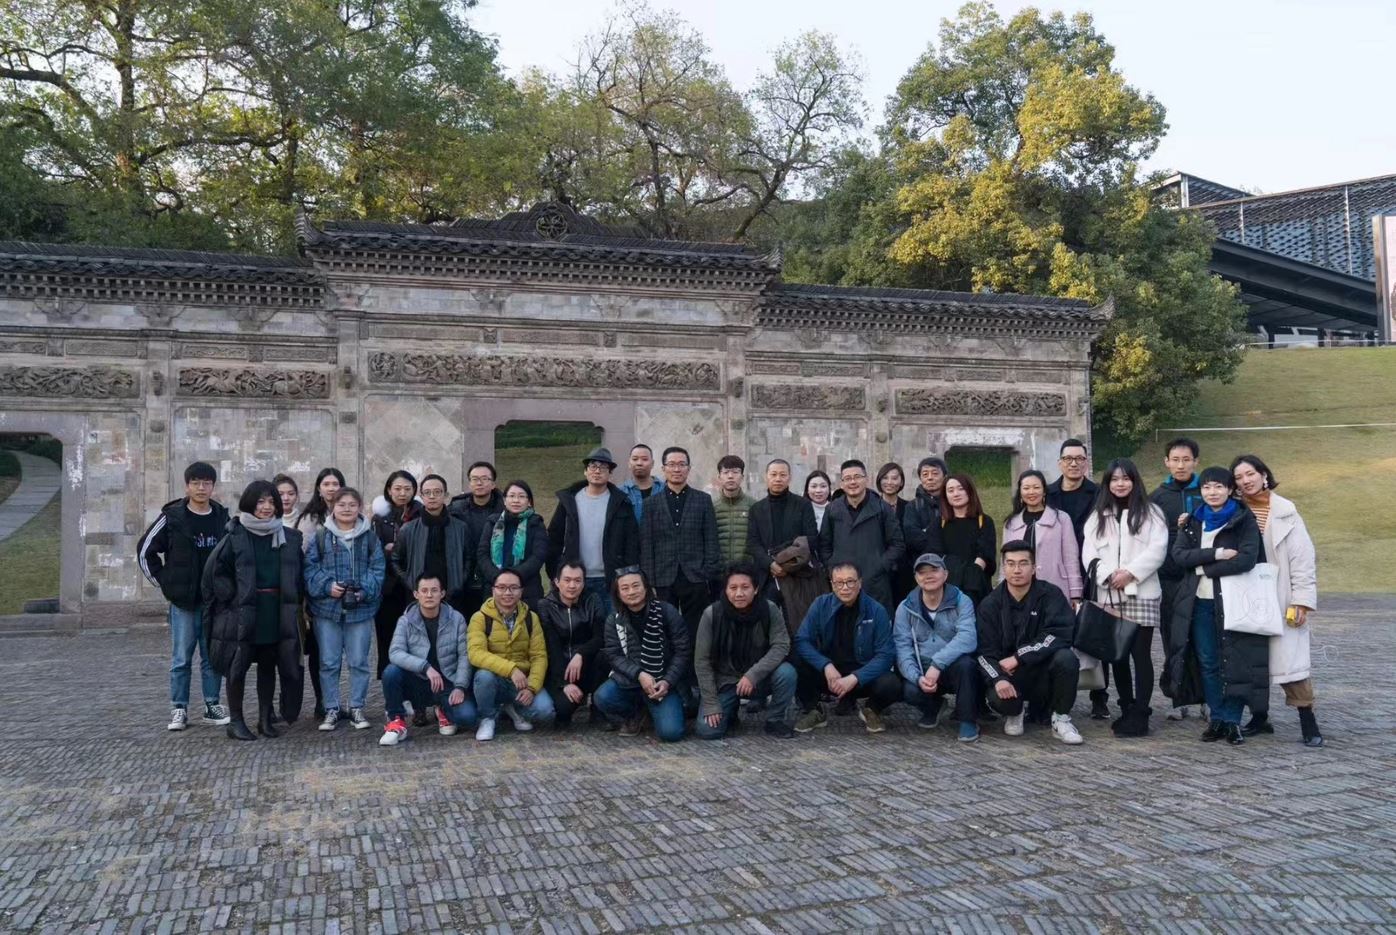 Zigeng Wang was Invited to Attend the 2019 Perception Forum at the China Academy of Art School of Intermedia Art: Creative Collective as a Method